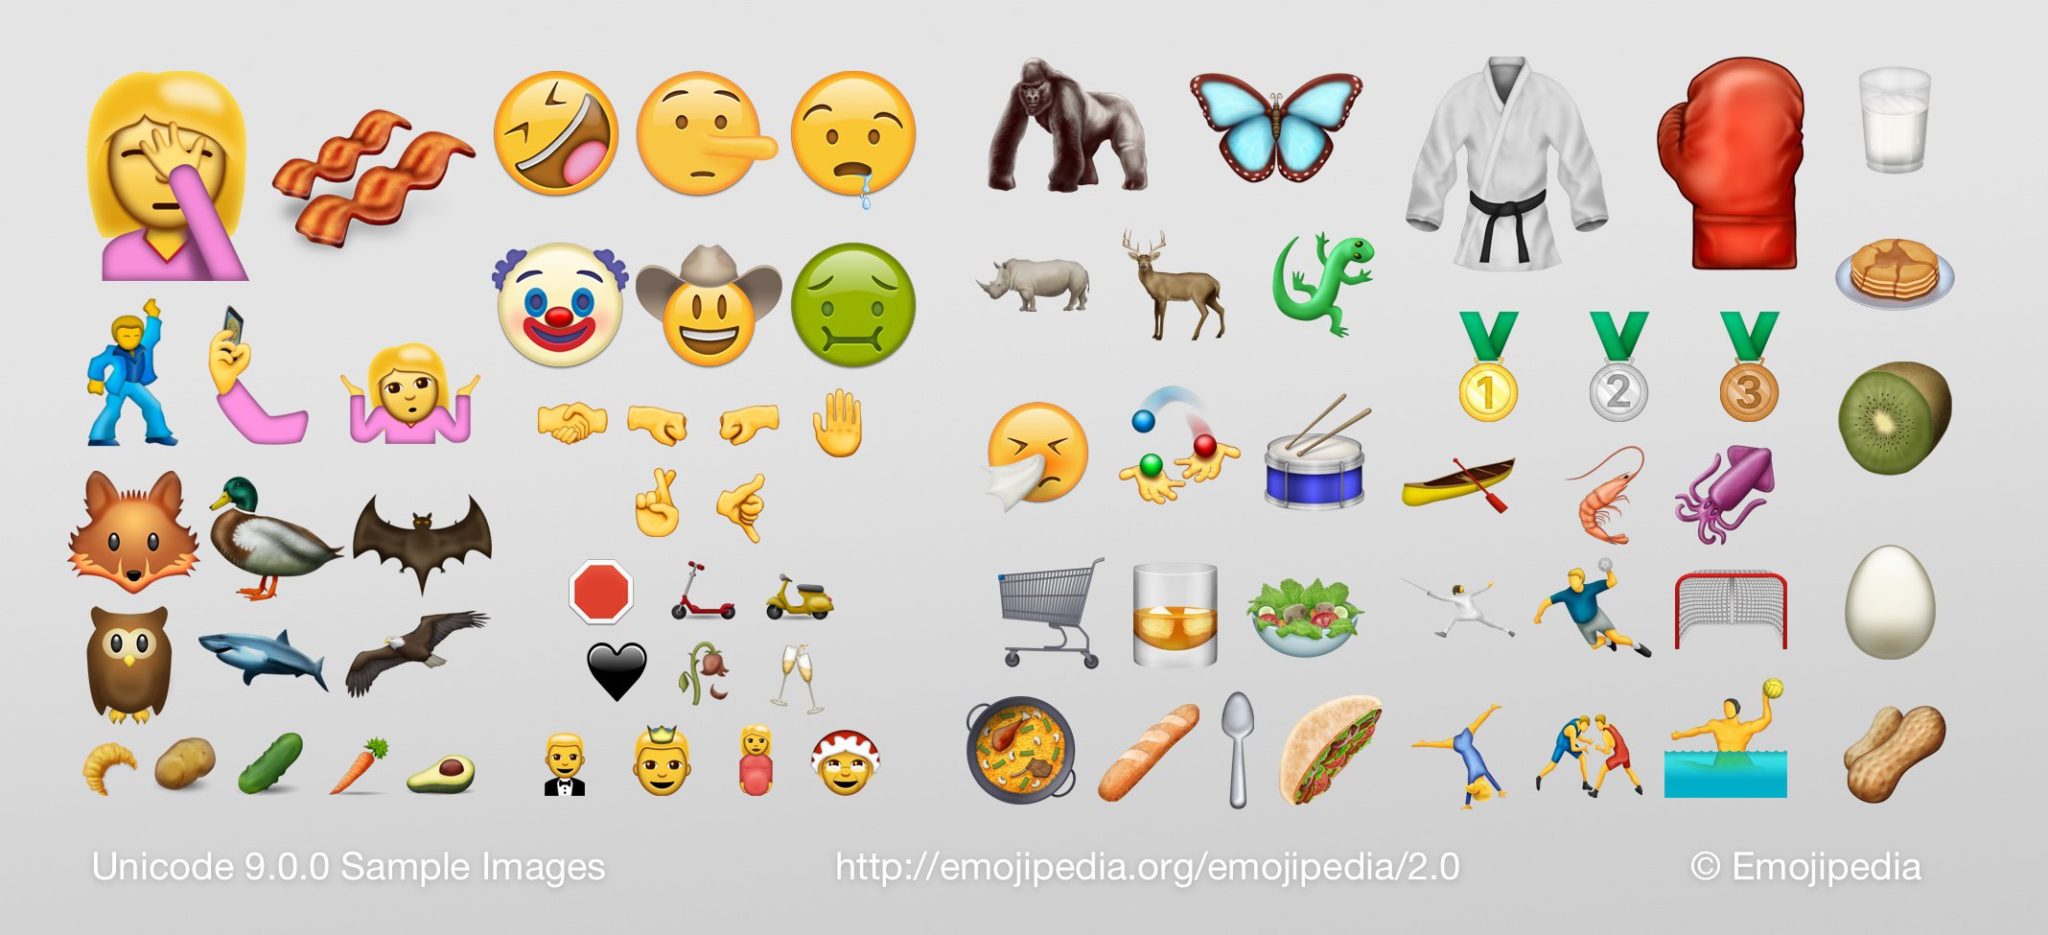 New Emoji’s All Set To Release On WhatsApp